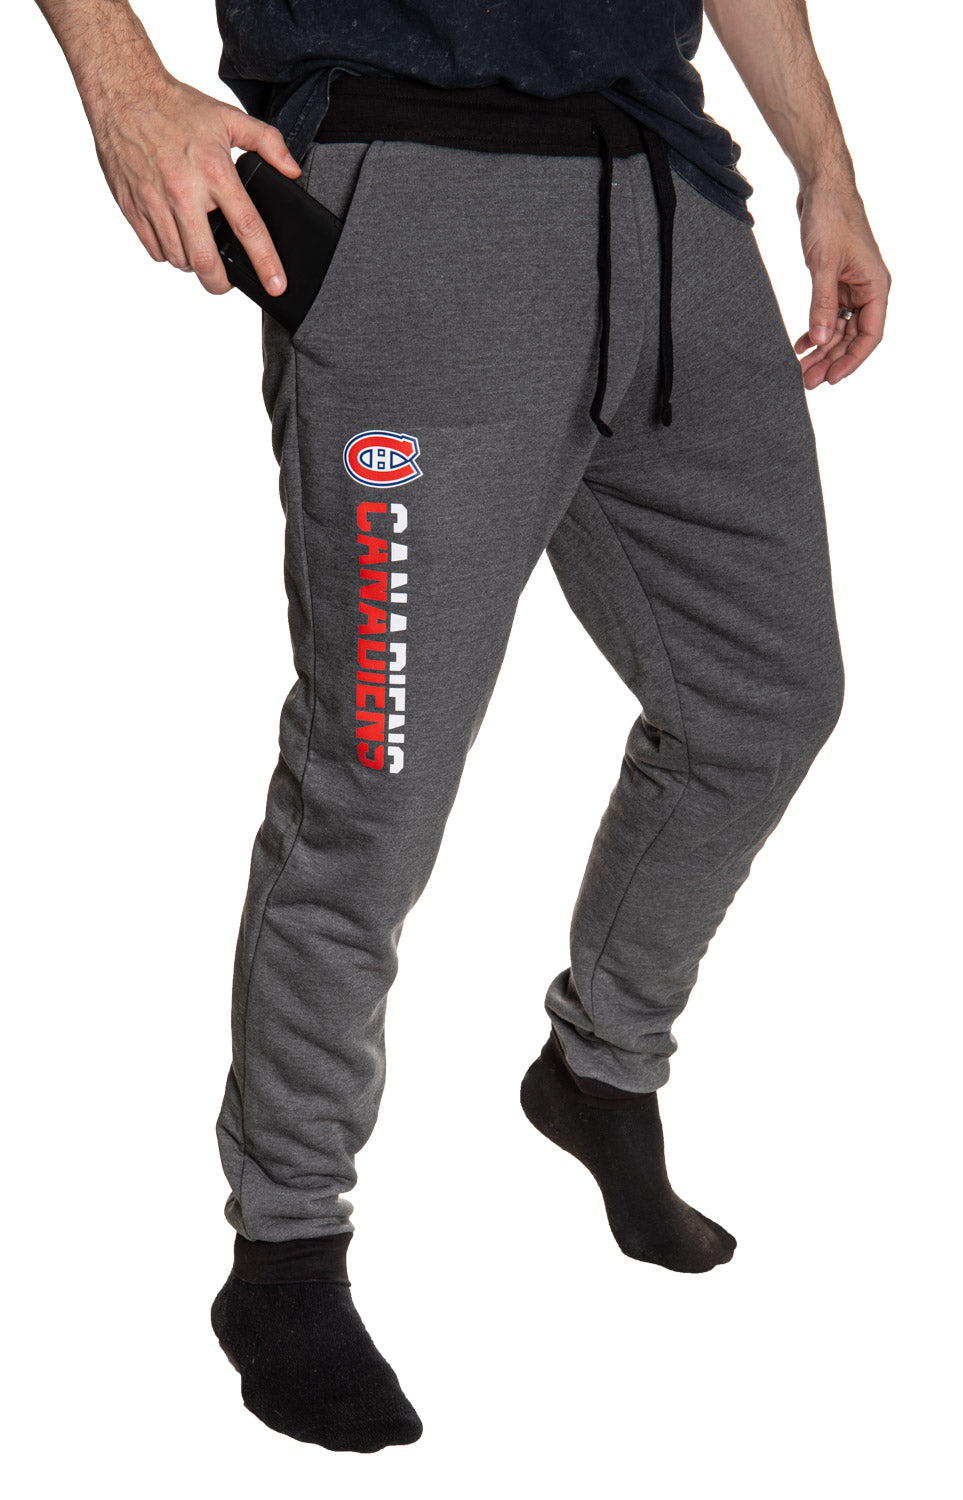 Montreal Canadiens NHL Unisex Sherpa Lined Warm Sweatpants with Pockets